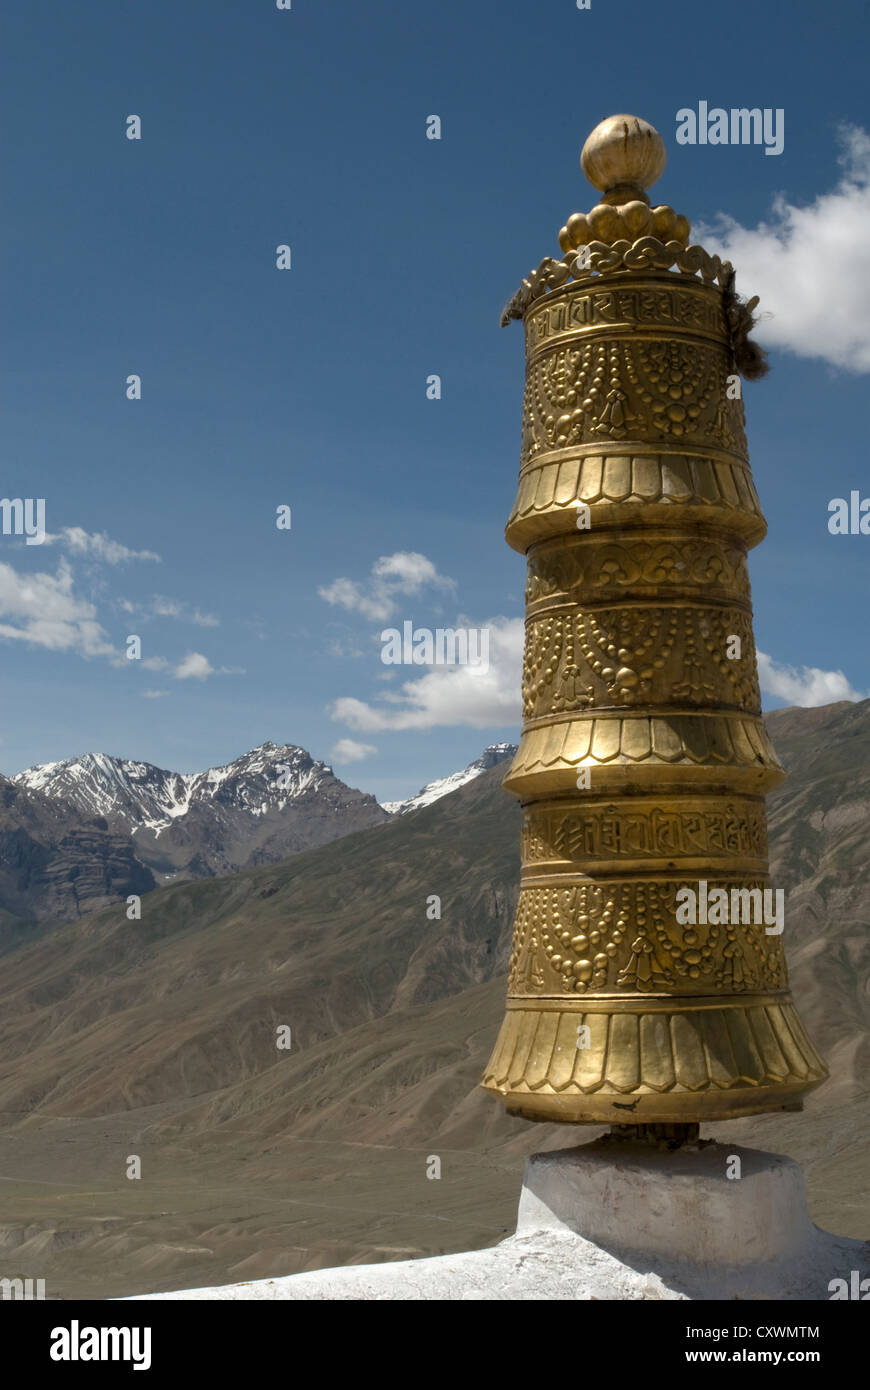 A roof detail overlooking Spiti valley at Key Monastery, Spiti, Northern India Stock Photo